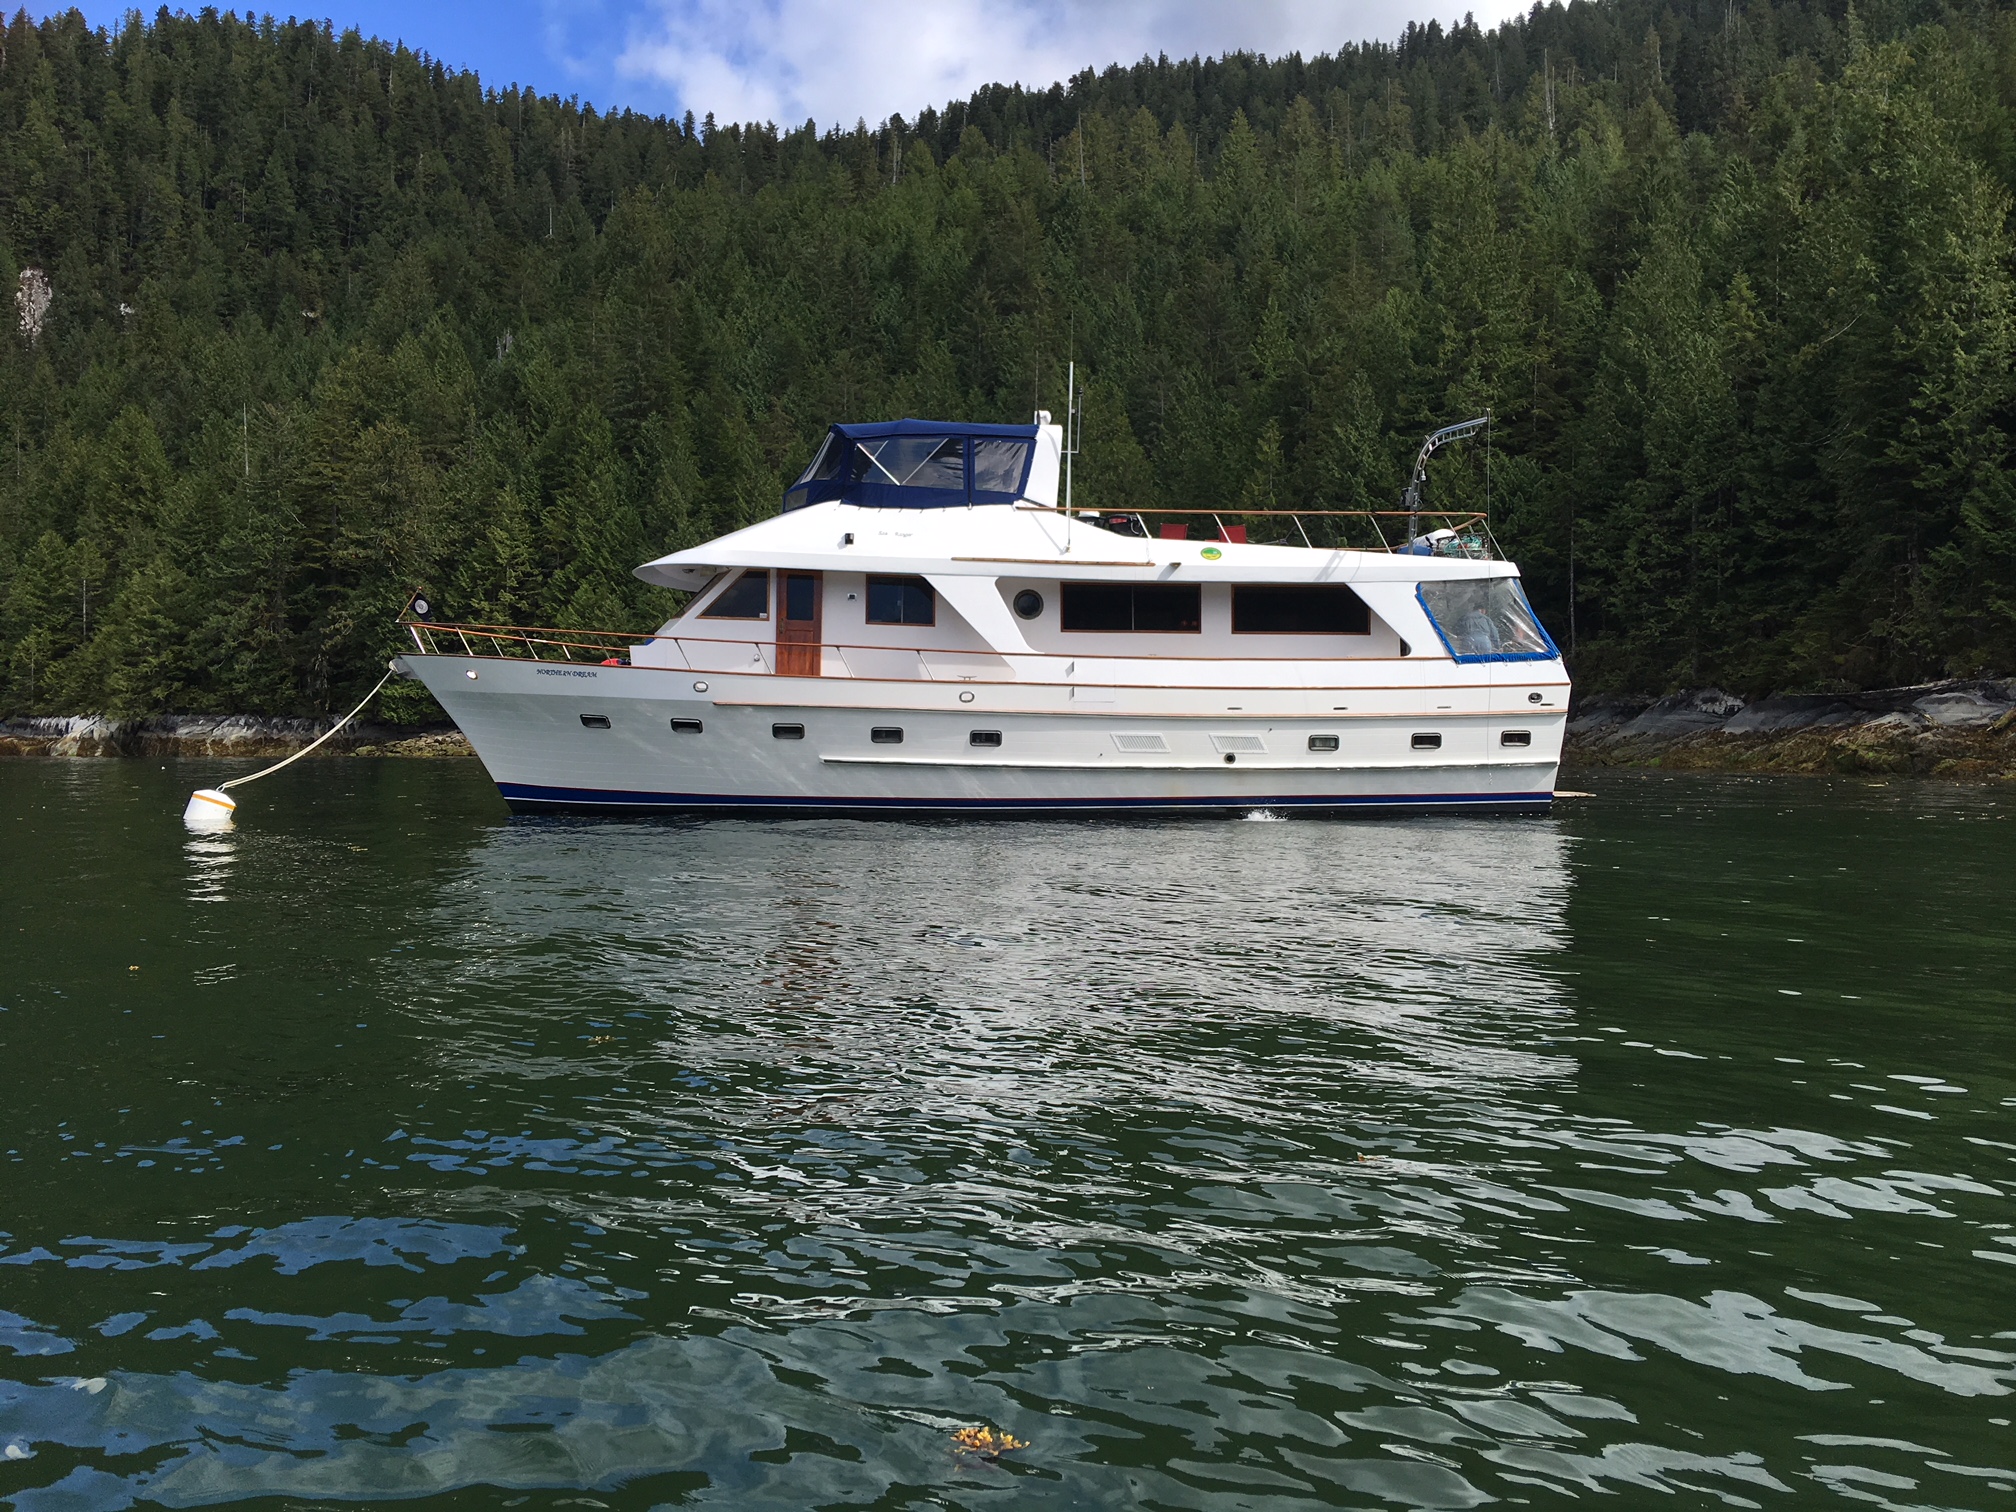 The Northern Dream yacht cruising the Columbia River Gorge